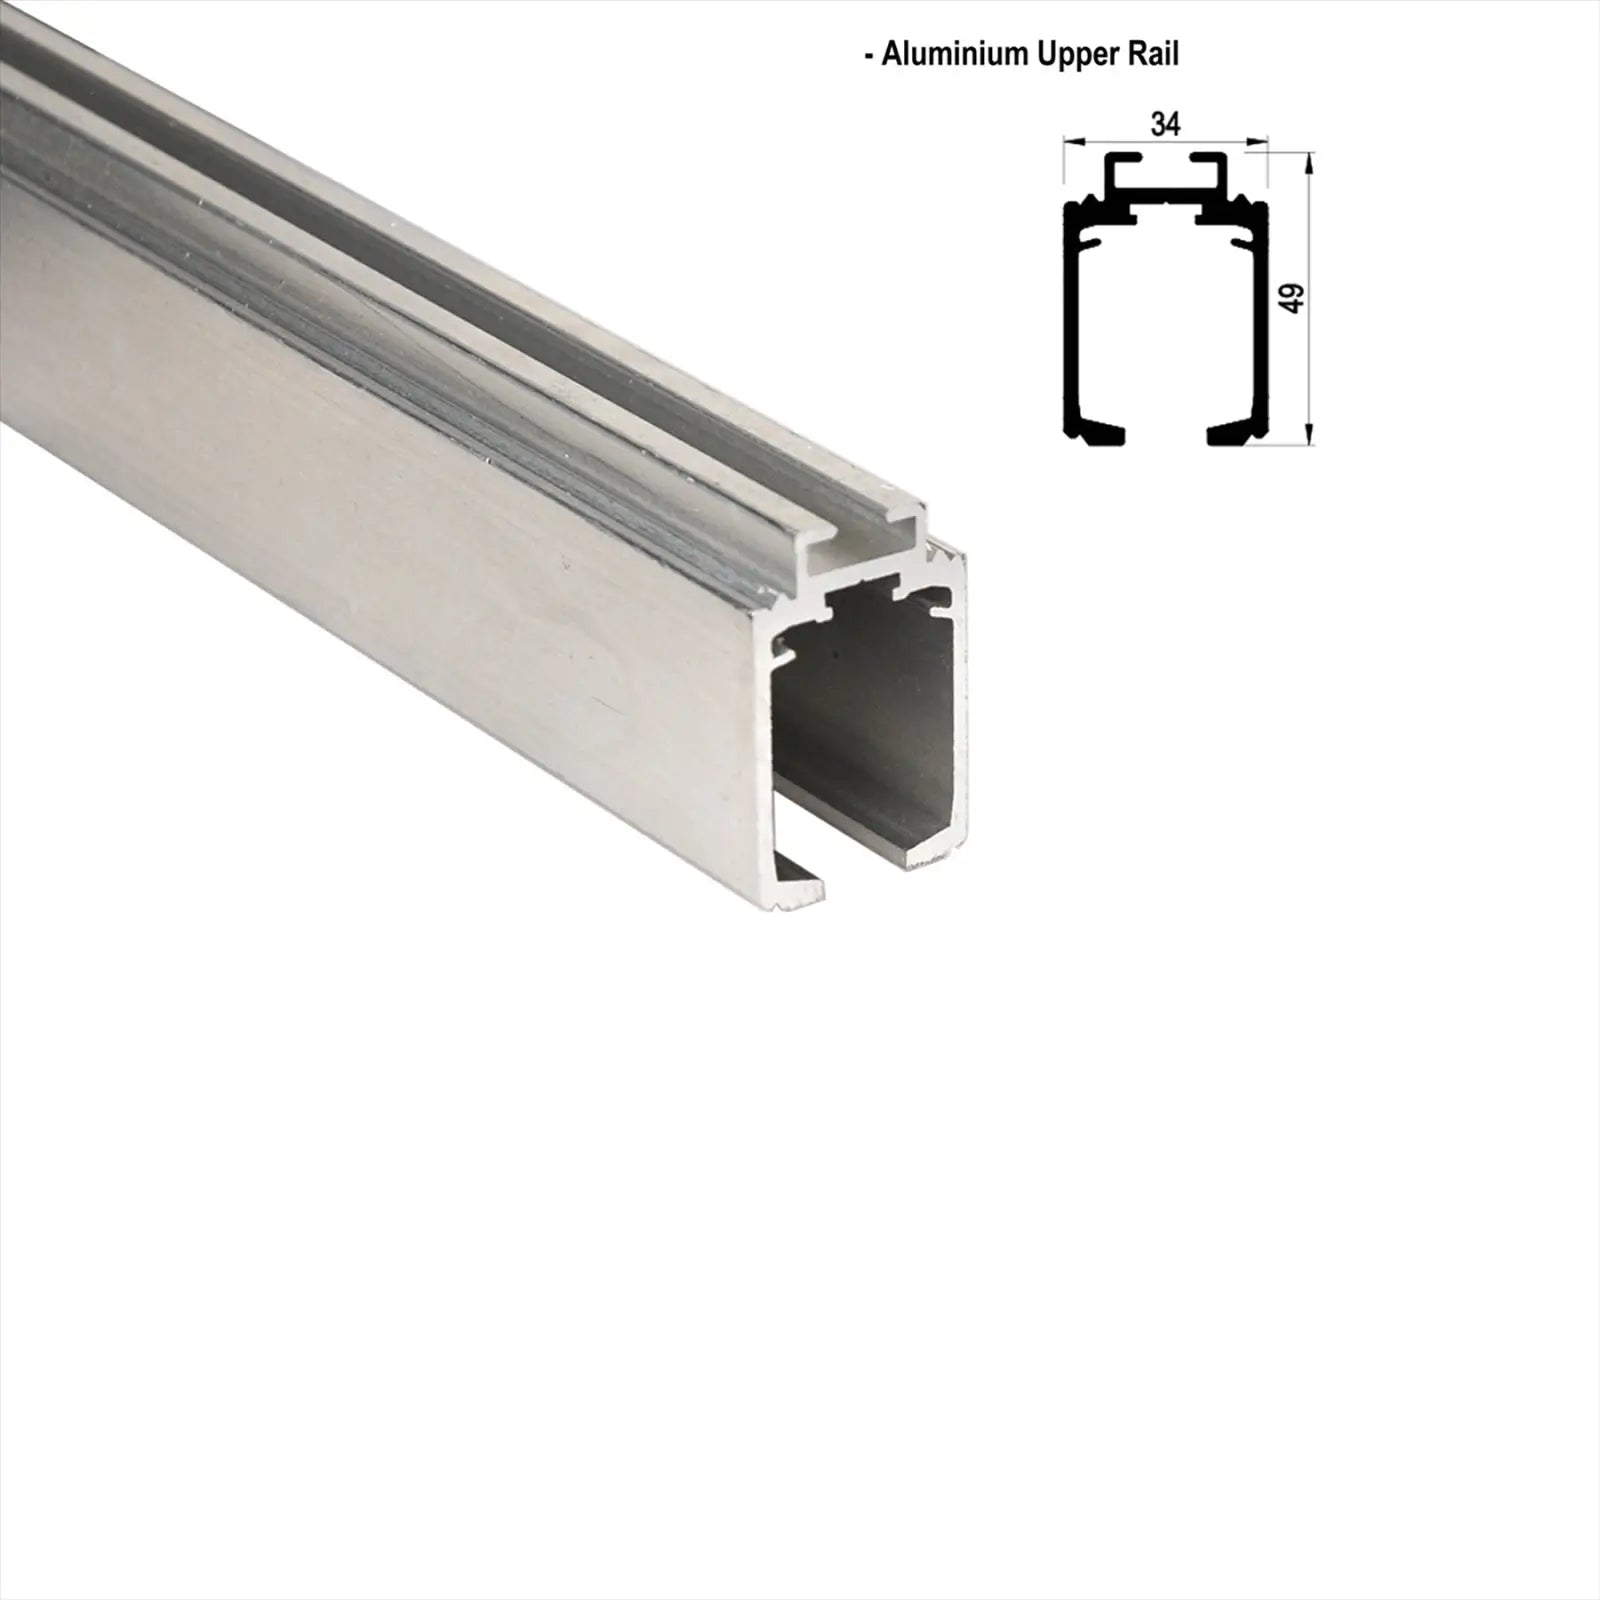 DS-Slide Double Synchro Sliding Door Kit - 4800mm Track - Both Way Soft Close - Decor And Decor